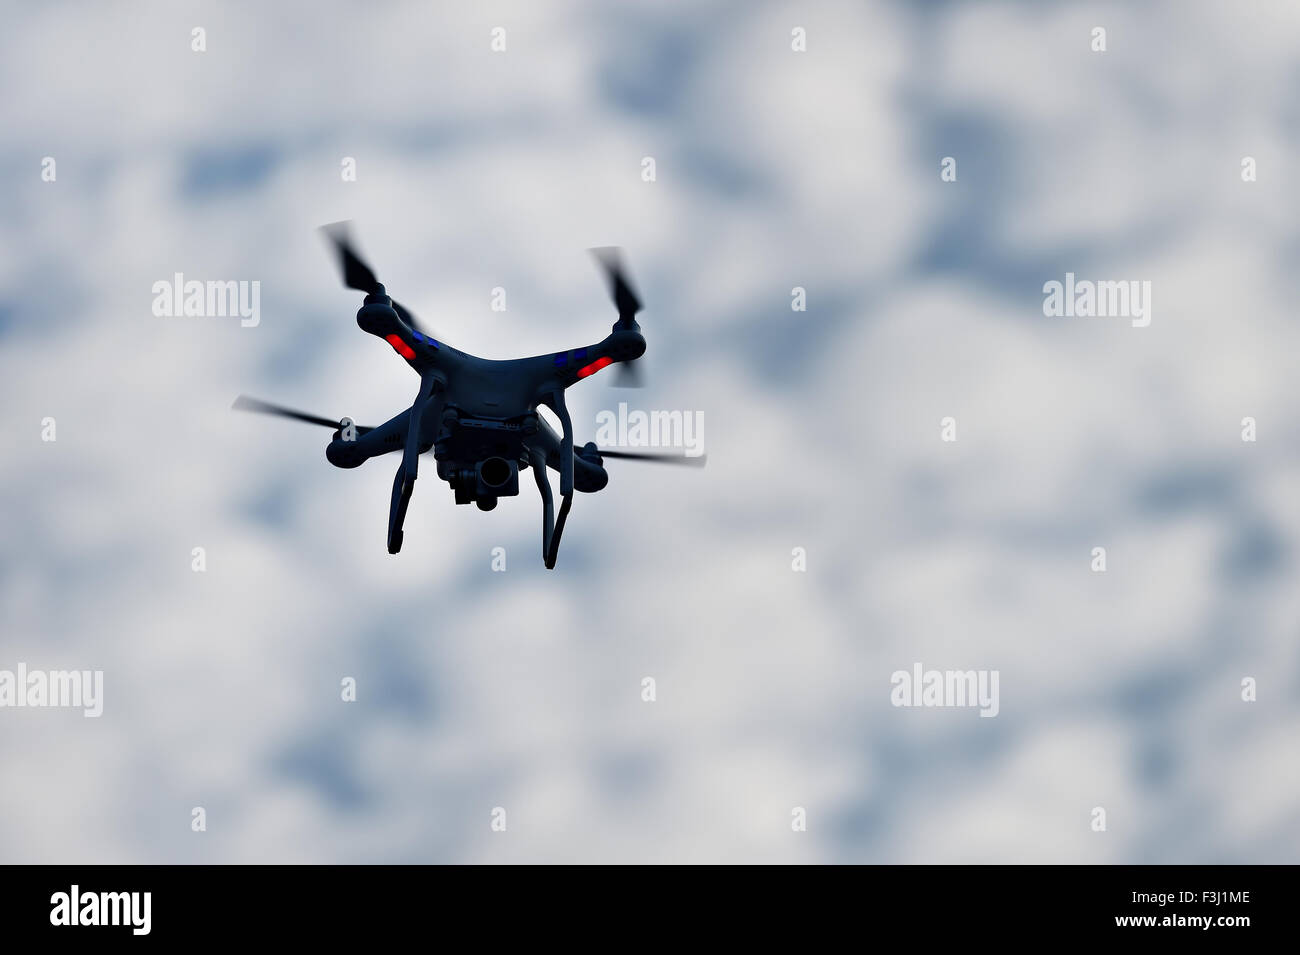 Aerial filming drone in action, silhouetted against blue cloudy sky Stock Photo